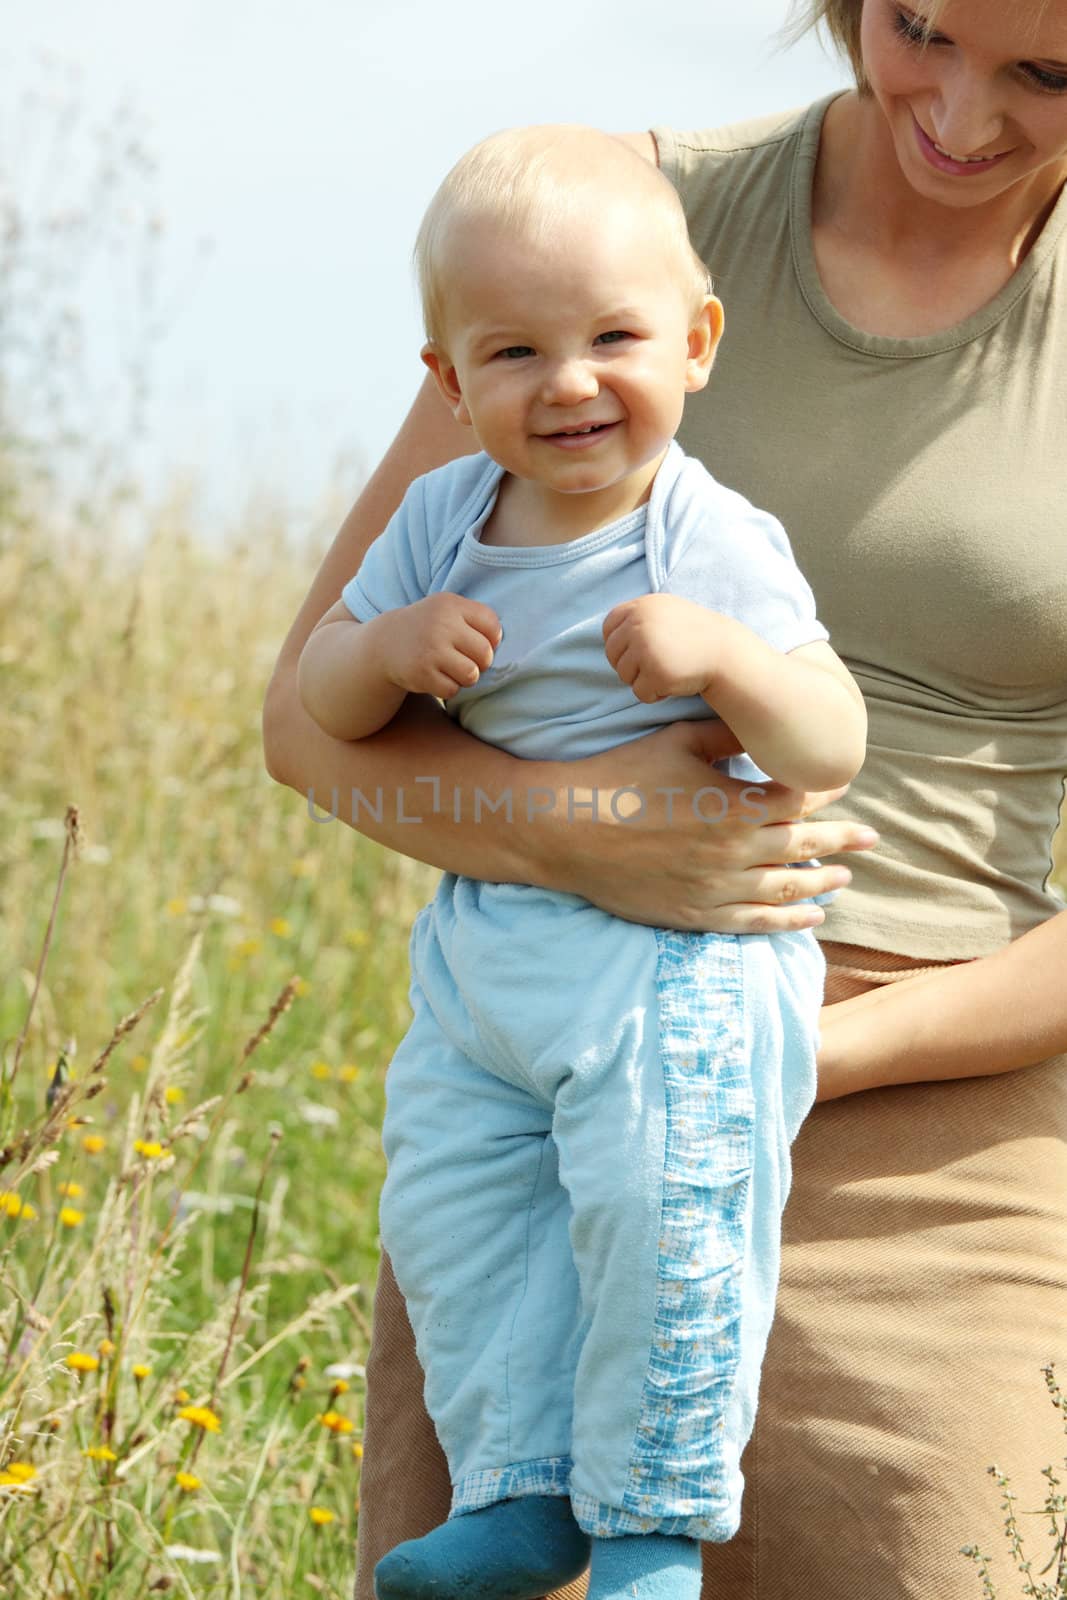 Adorable baby boy outdoors at sunny summer day